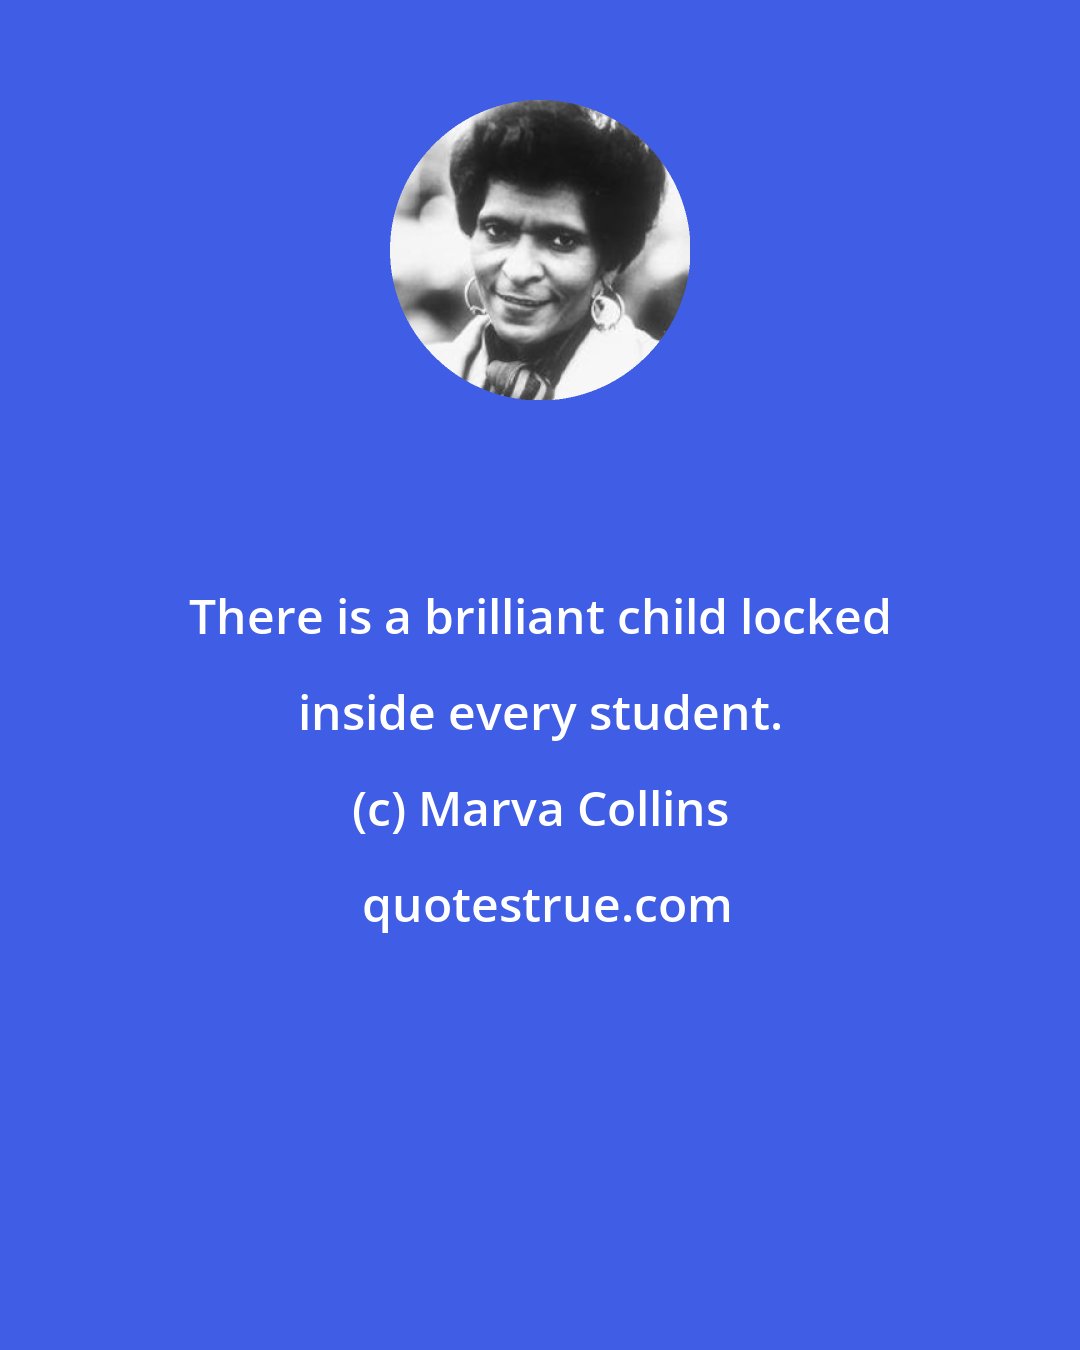 Marva Collins: There is a brilliant child locked inside every student.